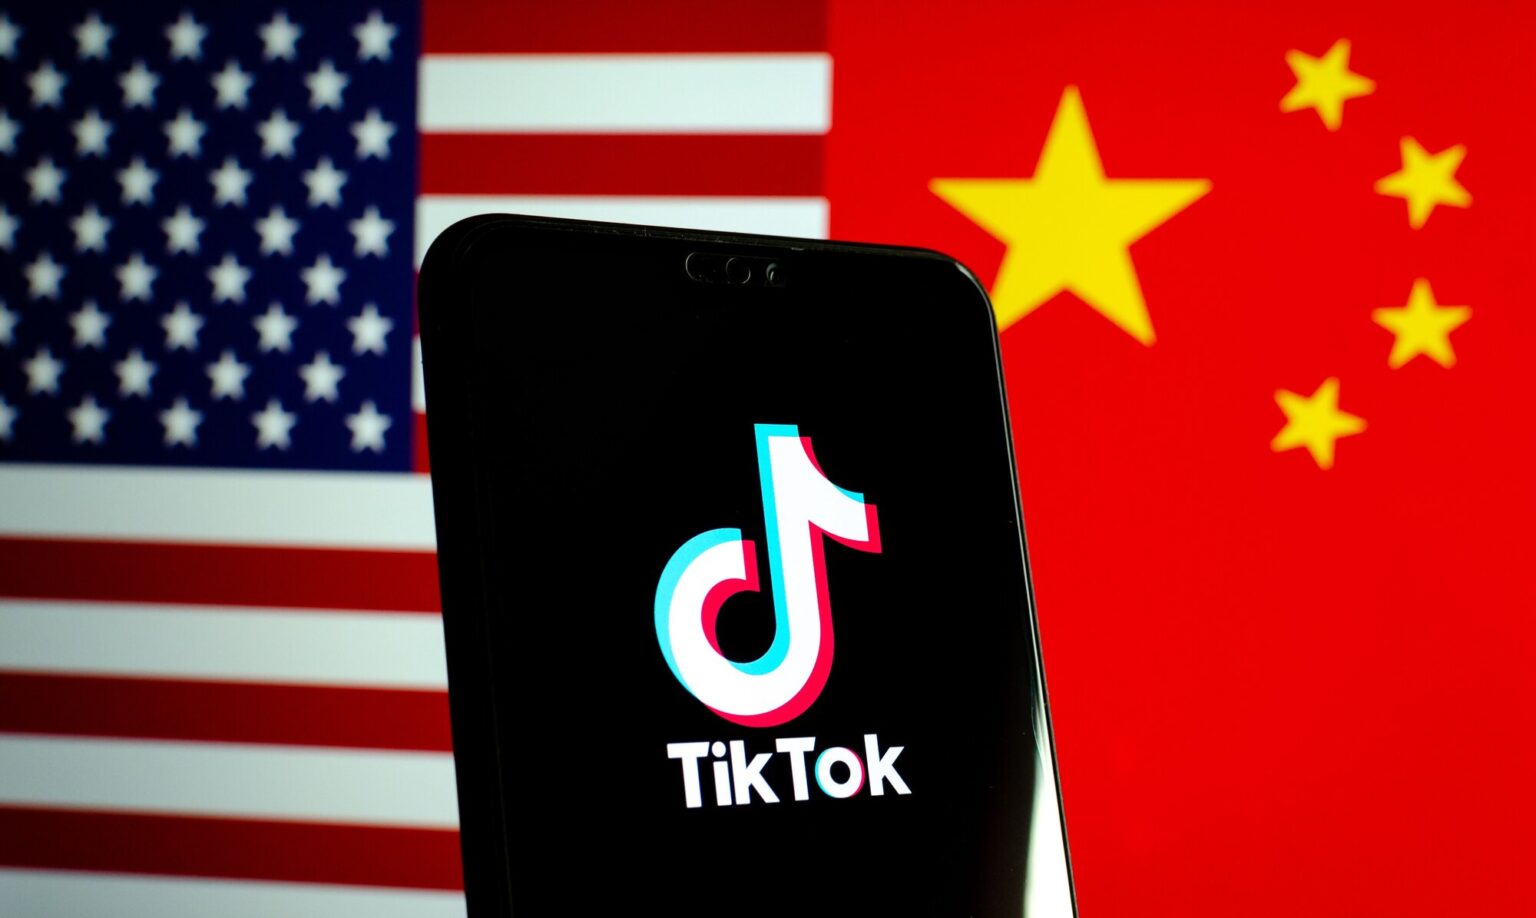 Despite a reprieve, will TikTok survive the U.S. vs. China trade war? Discover the ins and outs of the pending trade deal.